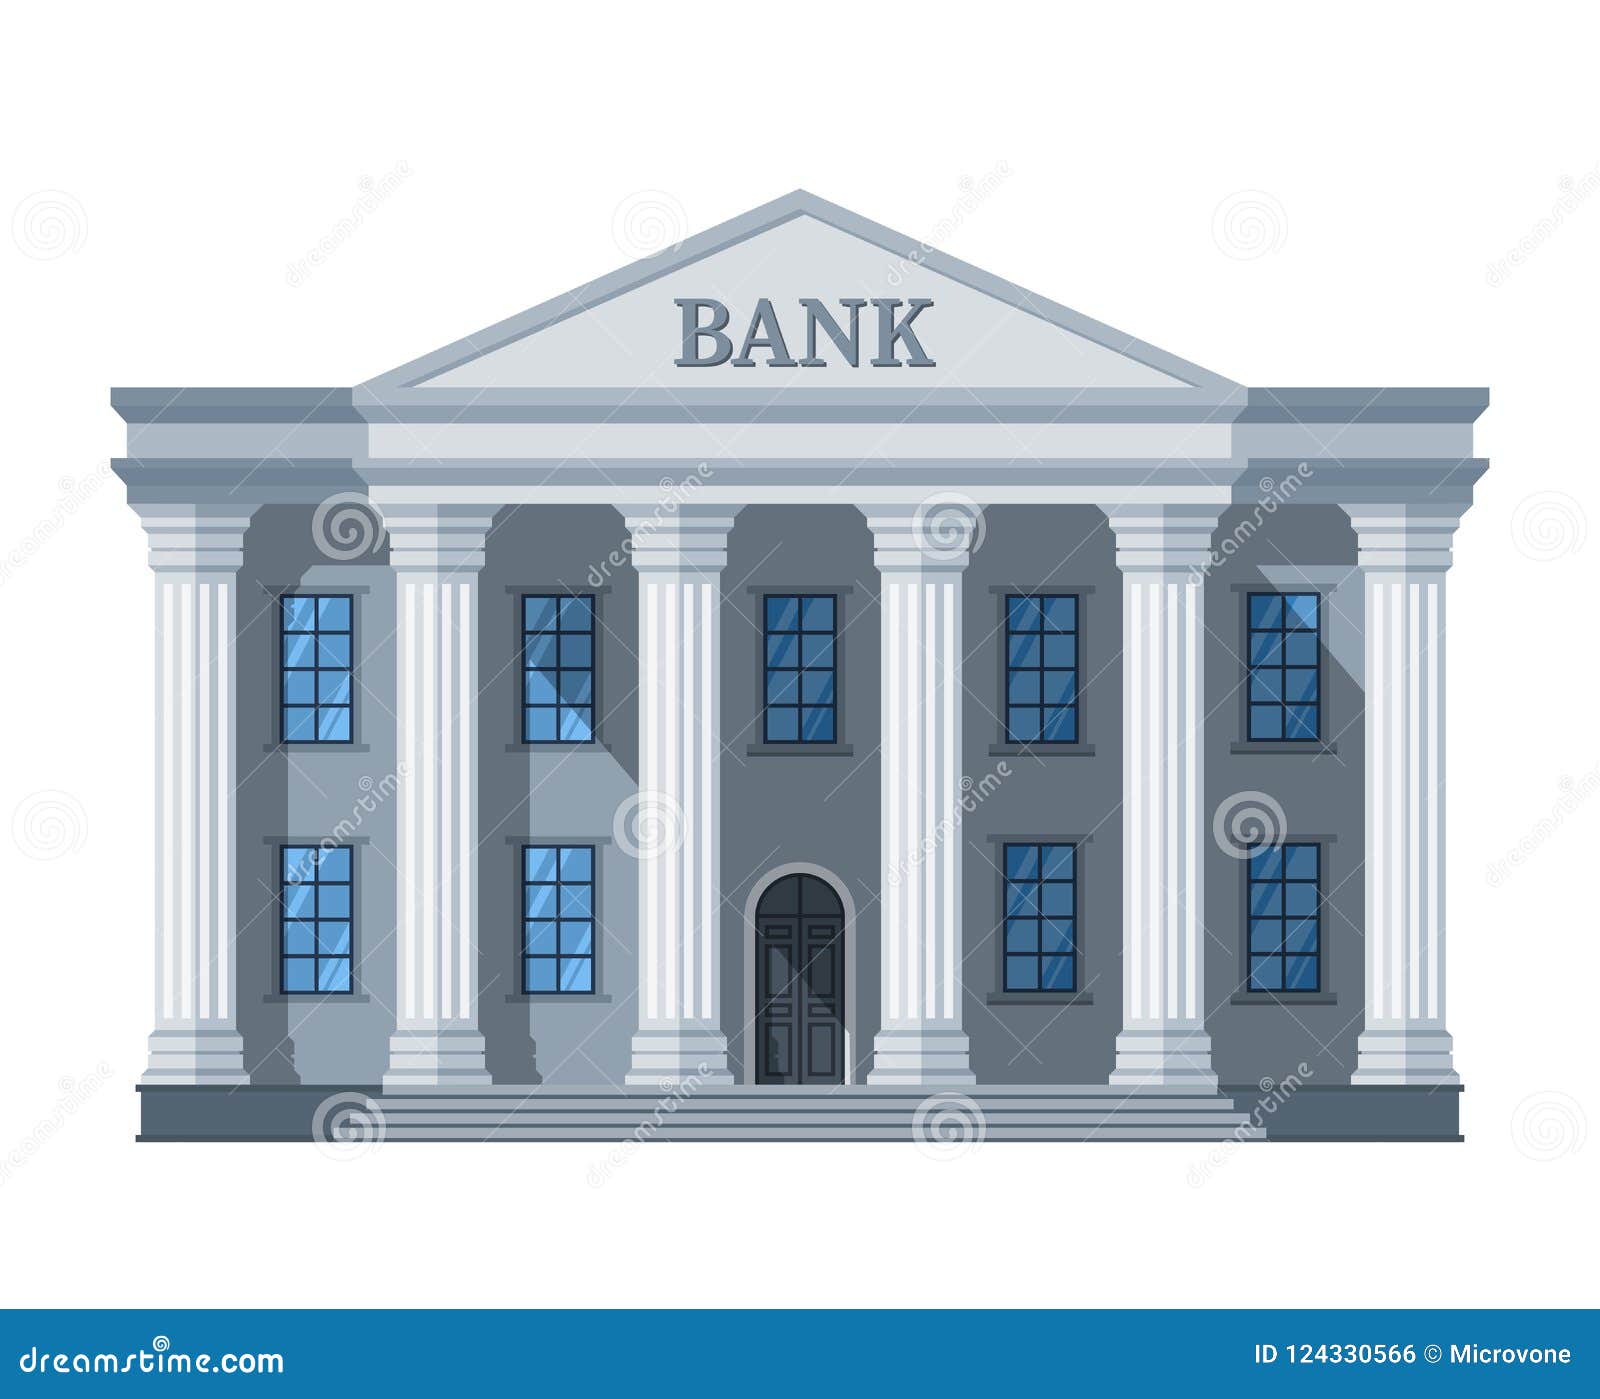 cartoon retro bank building or courthouse with columns    on white background